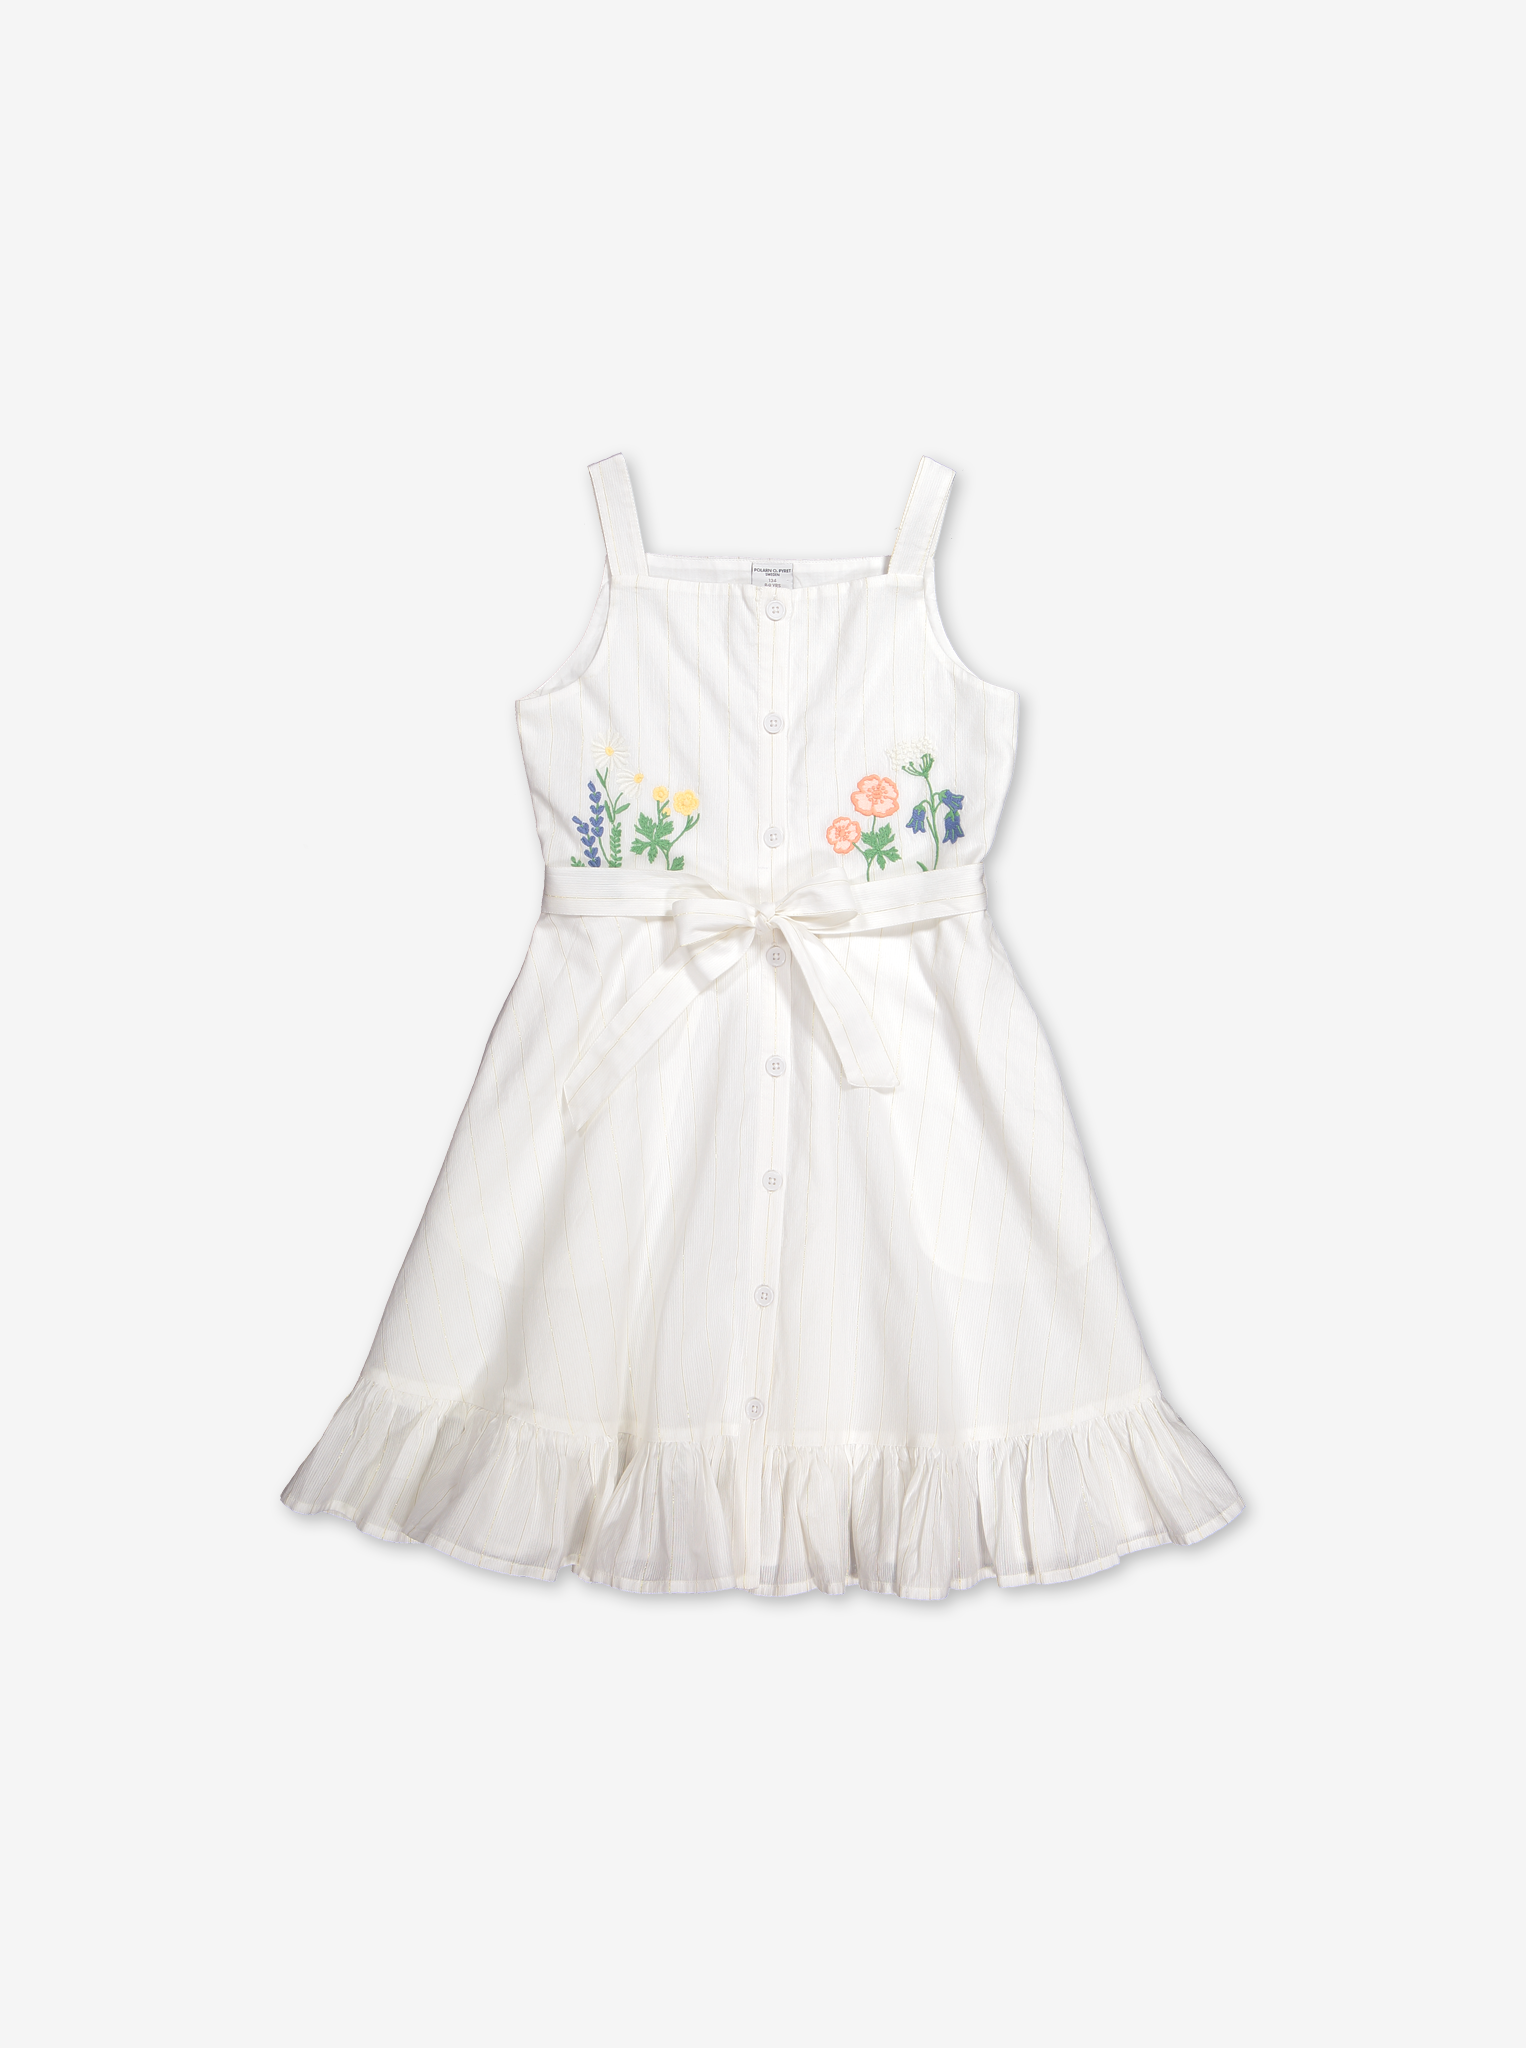 Flower Embroidered Kids Dress-Girl-6-12y-White